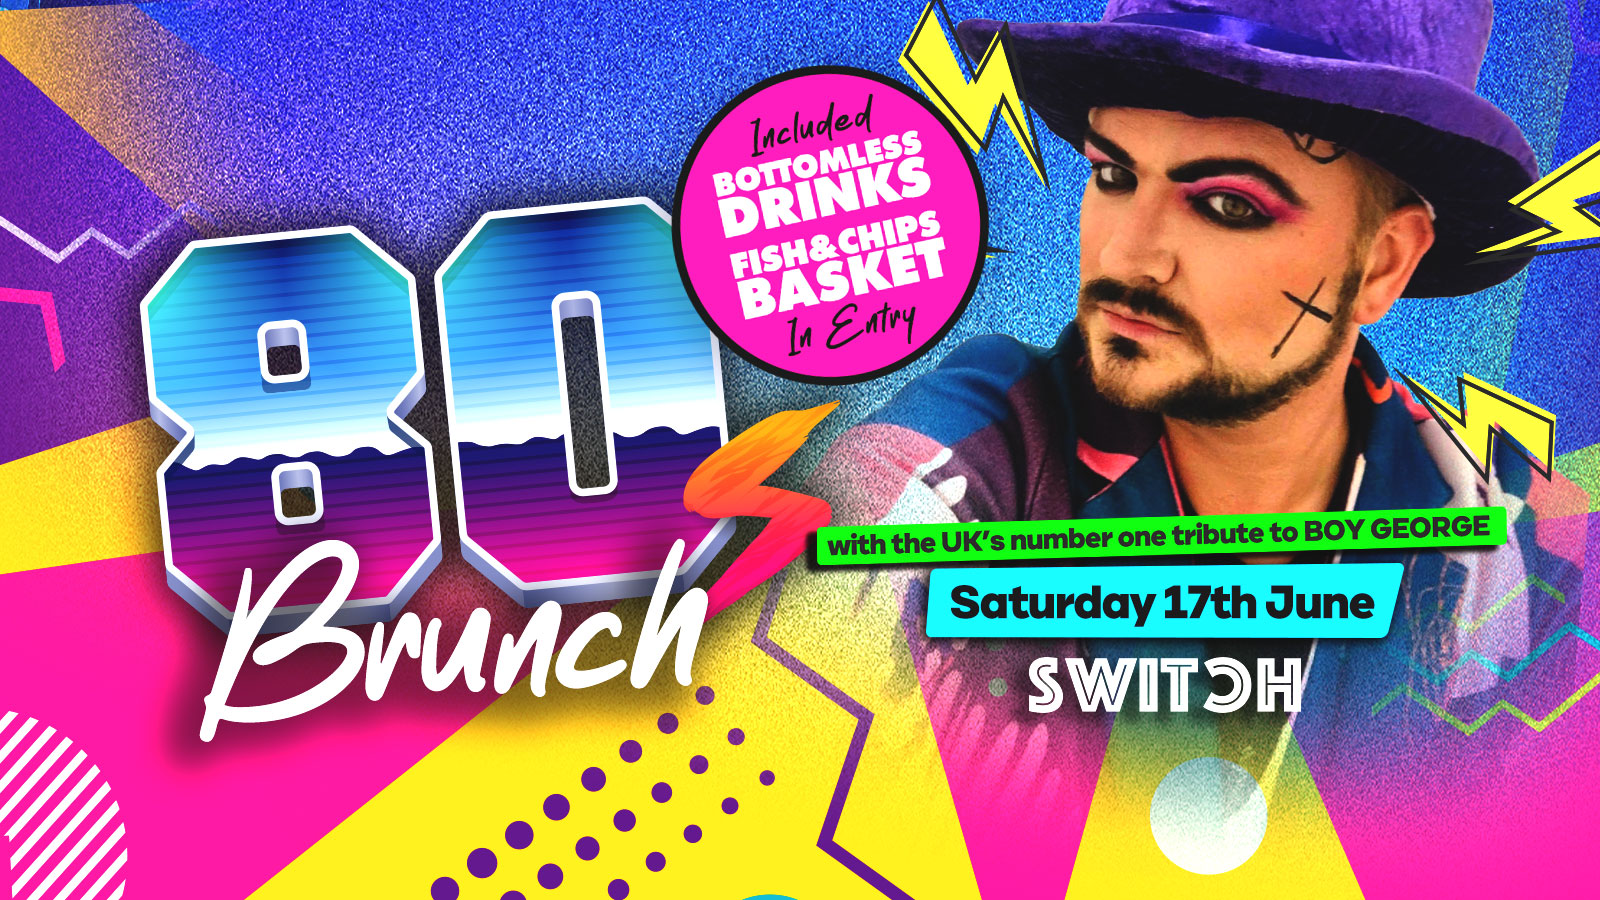 The 80s Brunch ft Boy George Tribute + 80s Explosion